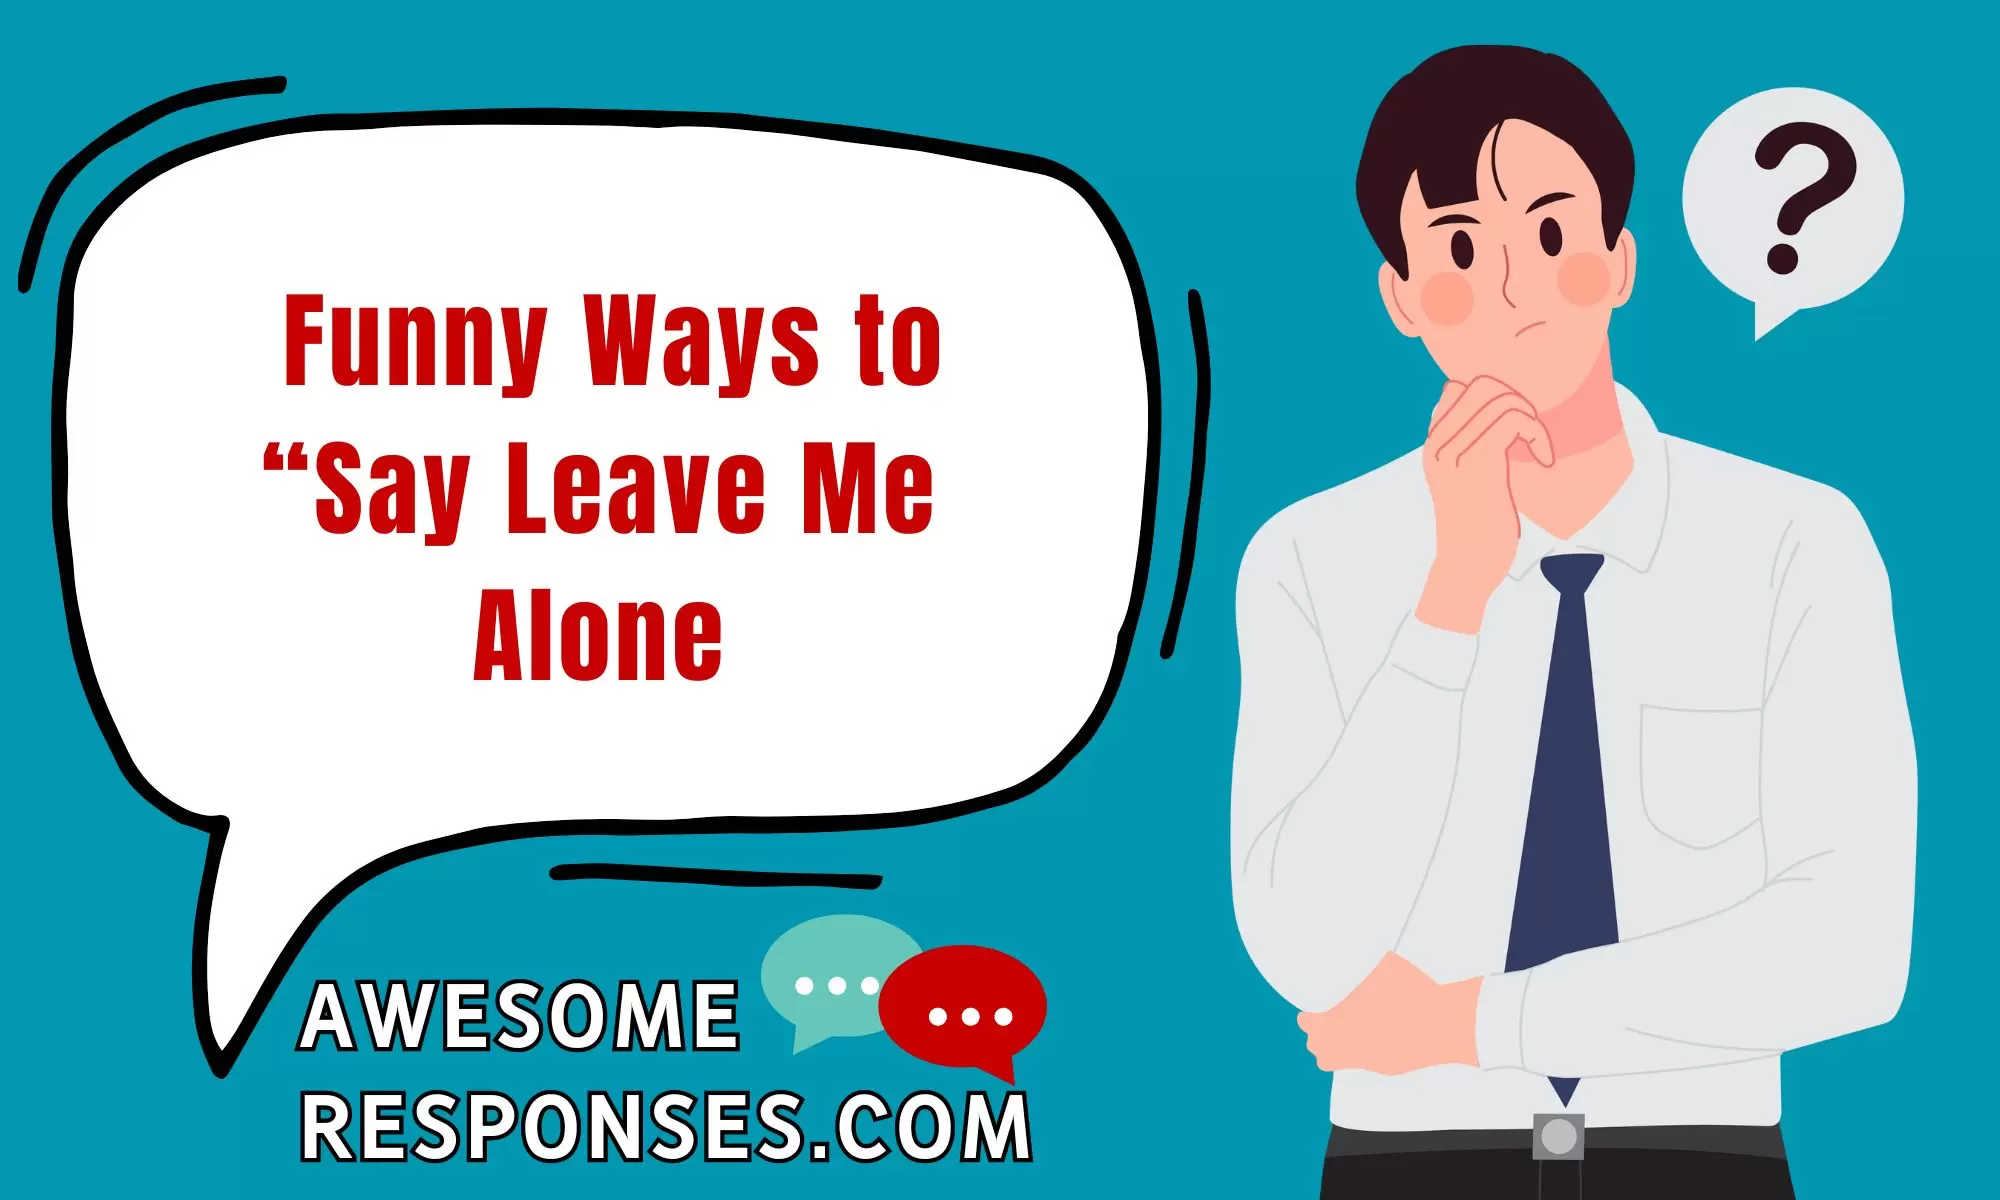 Funny Ways to “Say Leave Me Alone